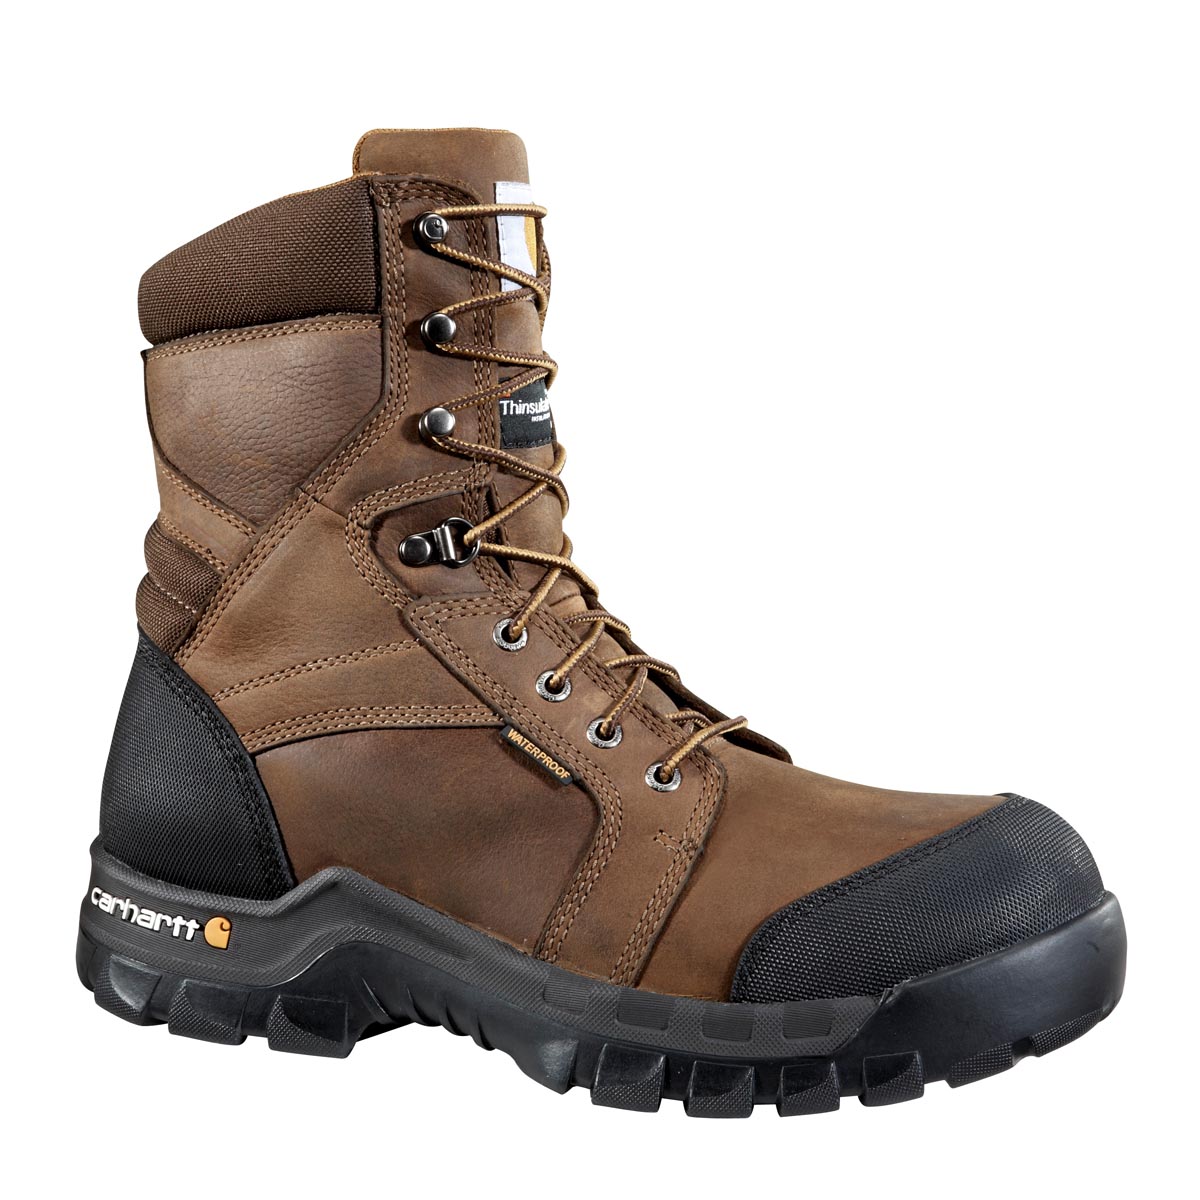 Carhartt Mens 8 Inch Brown Rugged Flex Waterproof Insulated Work Boot Non Safety Toe